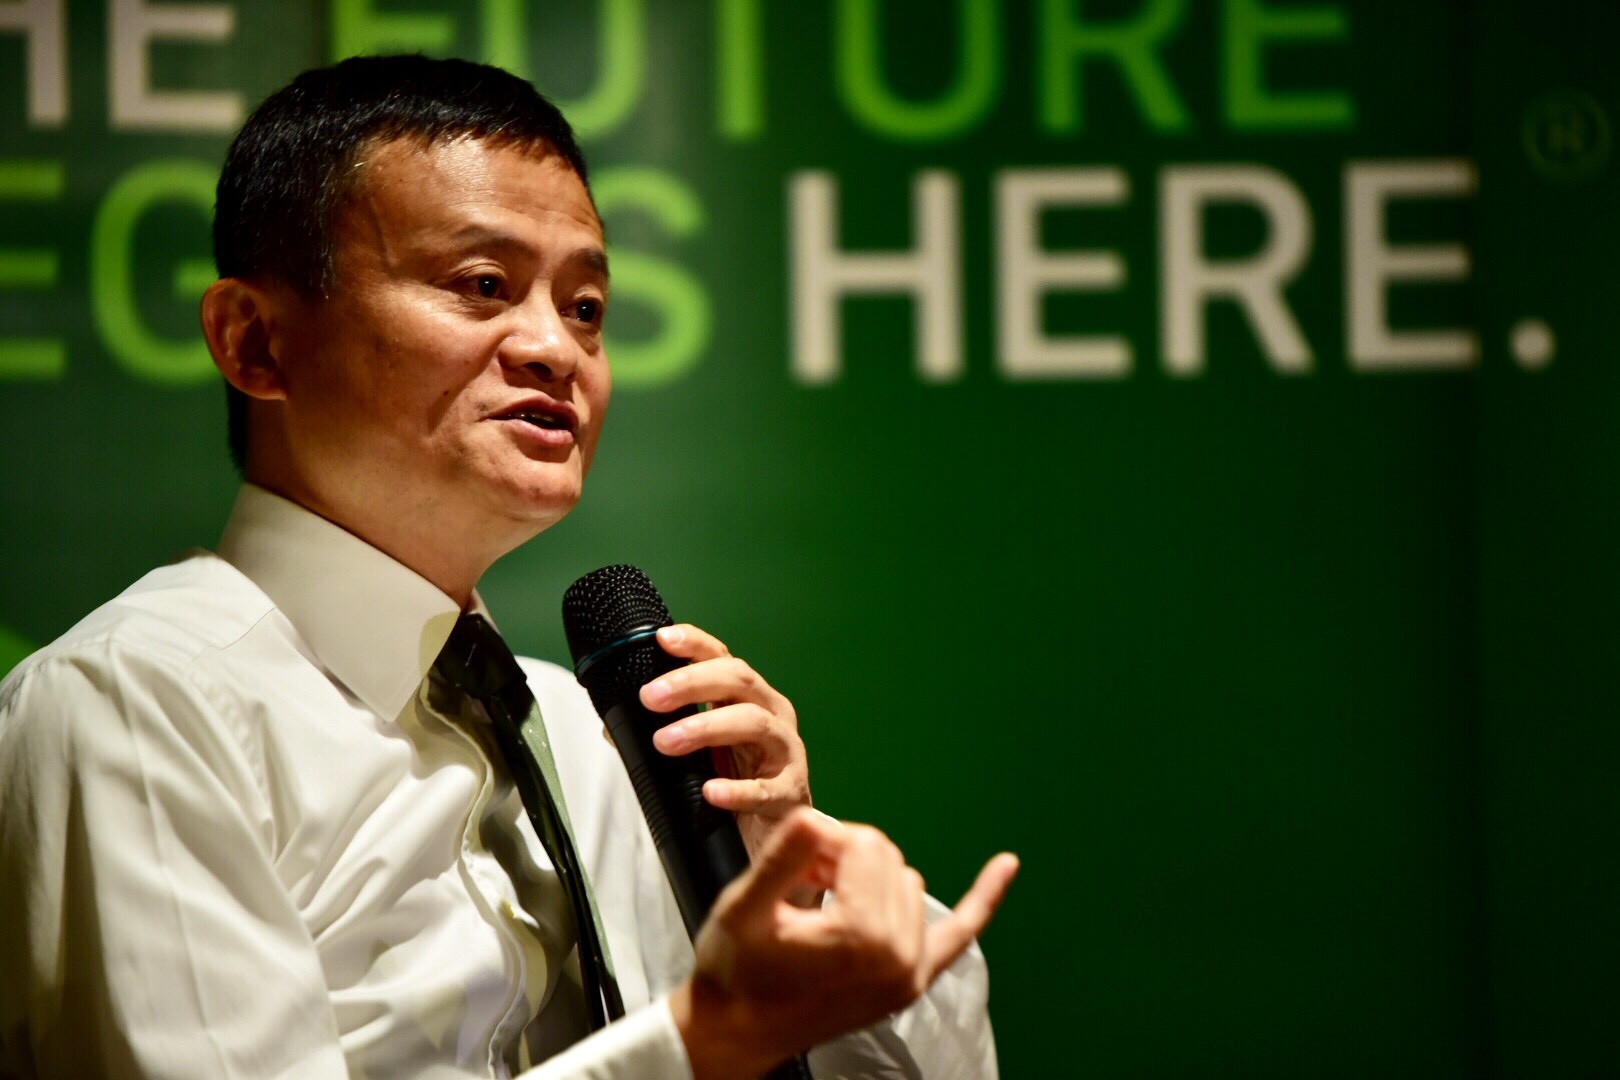 FAST FACTS Get to know Chinese business magnate Jack Ma